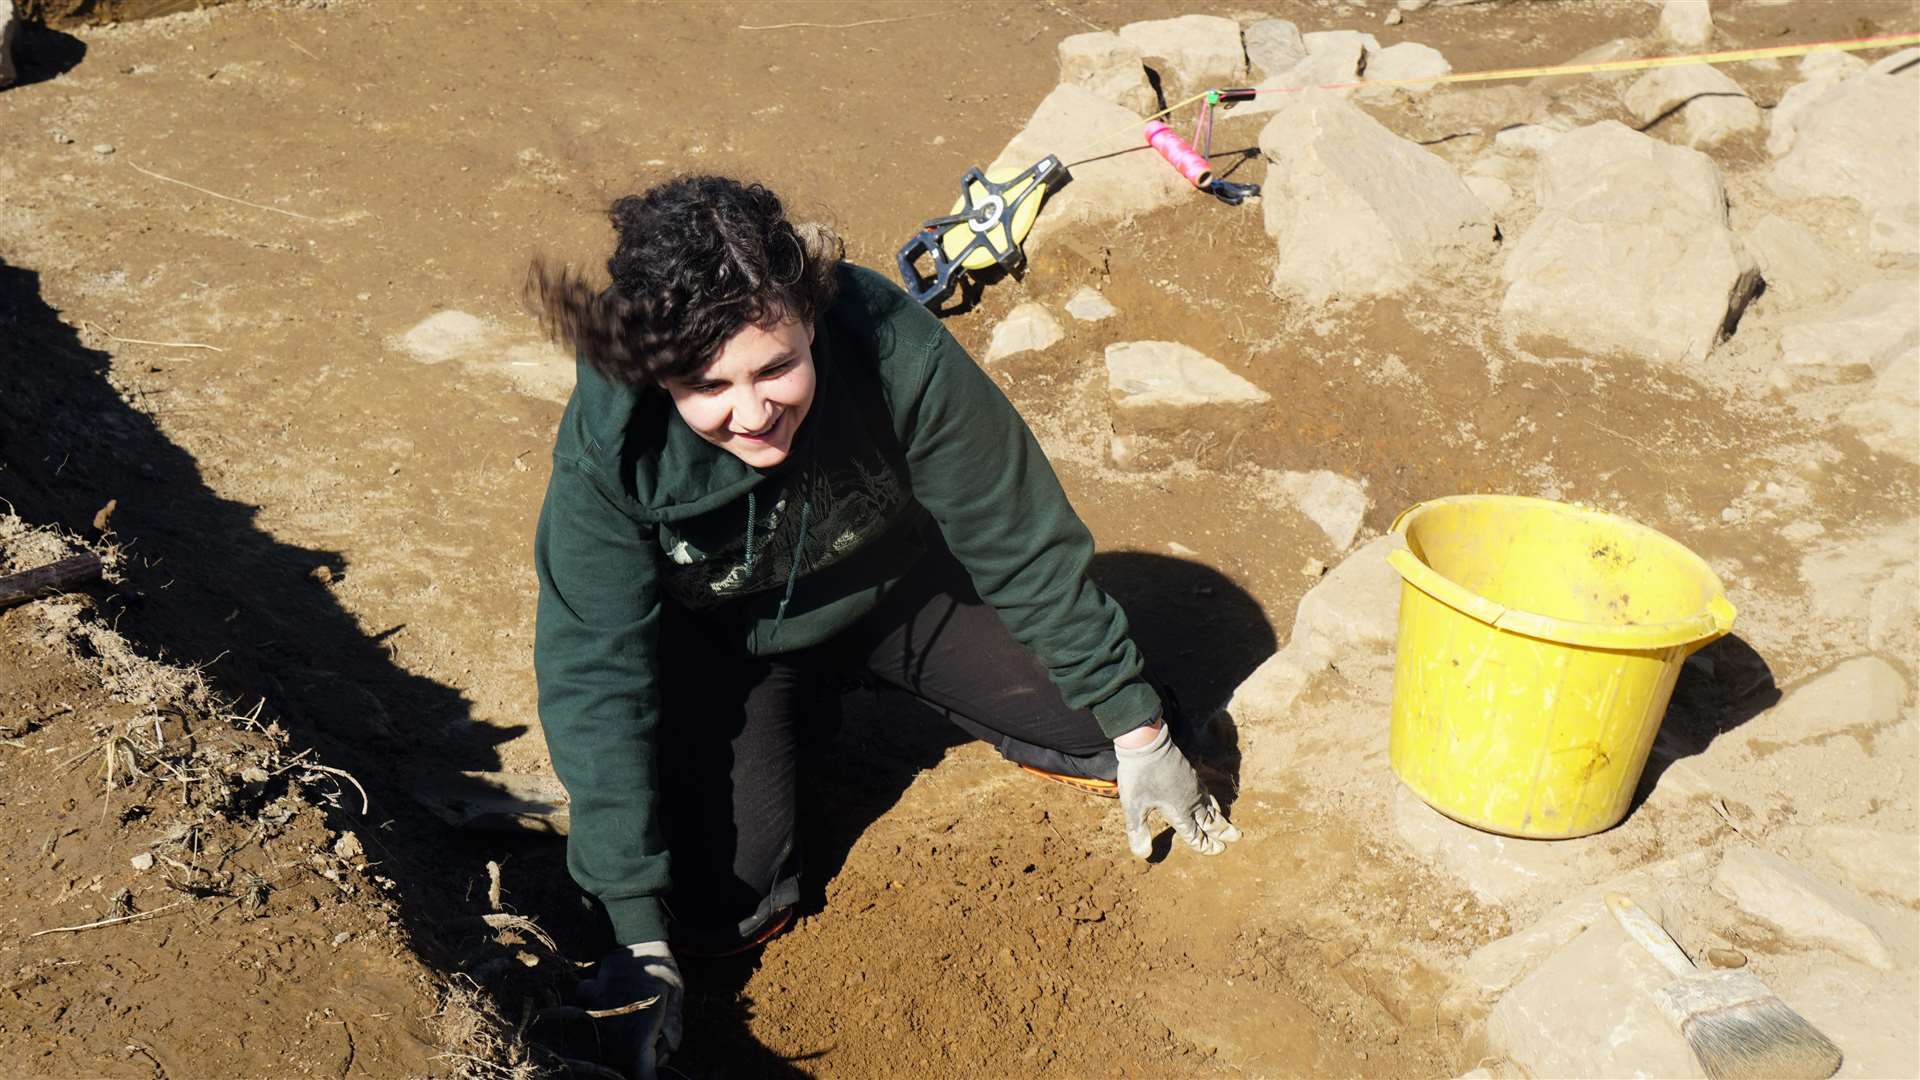 Student archaeologist Fiona Tisatreta comes from New Jersey originally and is studying at the University of Aberdeen. Picture: DGS